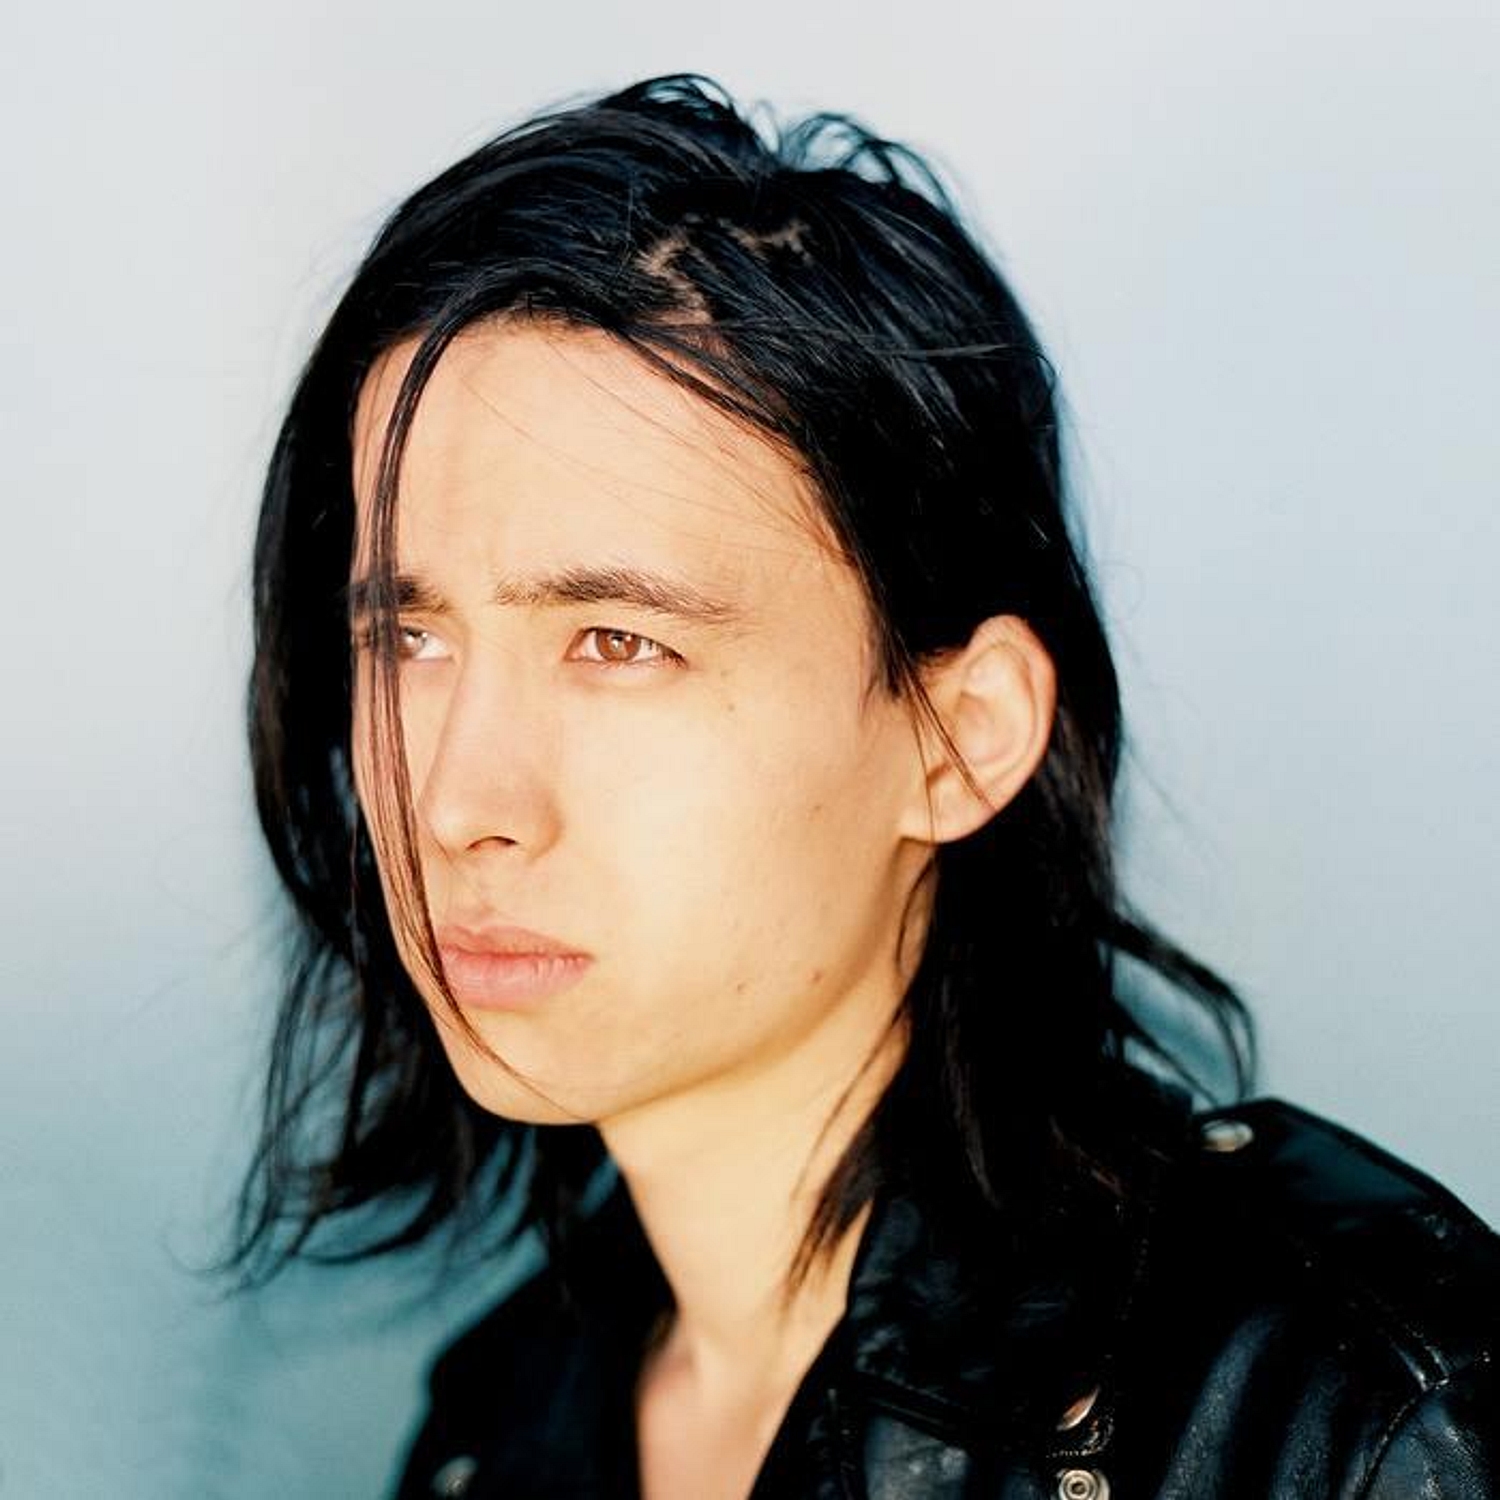 Cullen Omori: “I can see through romanticised ideas as the fake bullshit they are.”